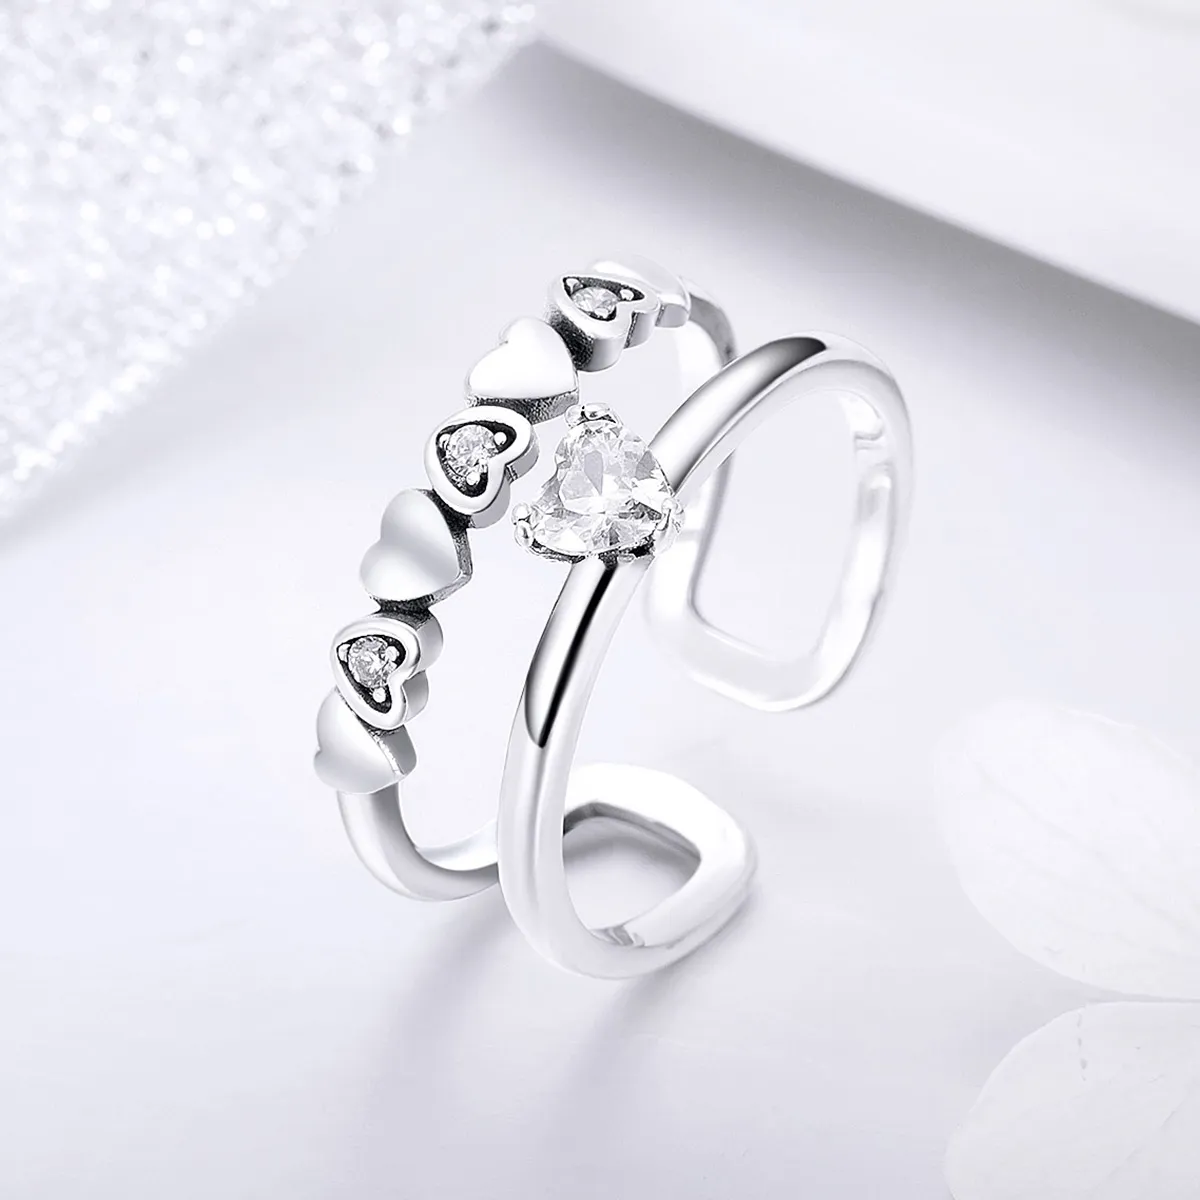 Pandora Style Silver Exquisite Heart Ring - SCR429